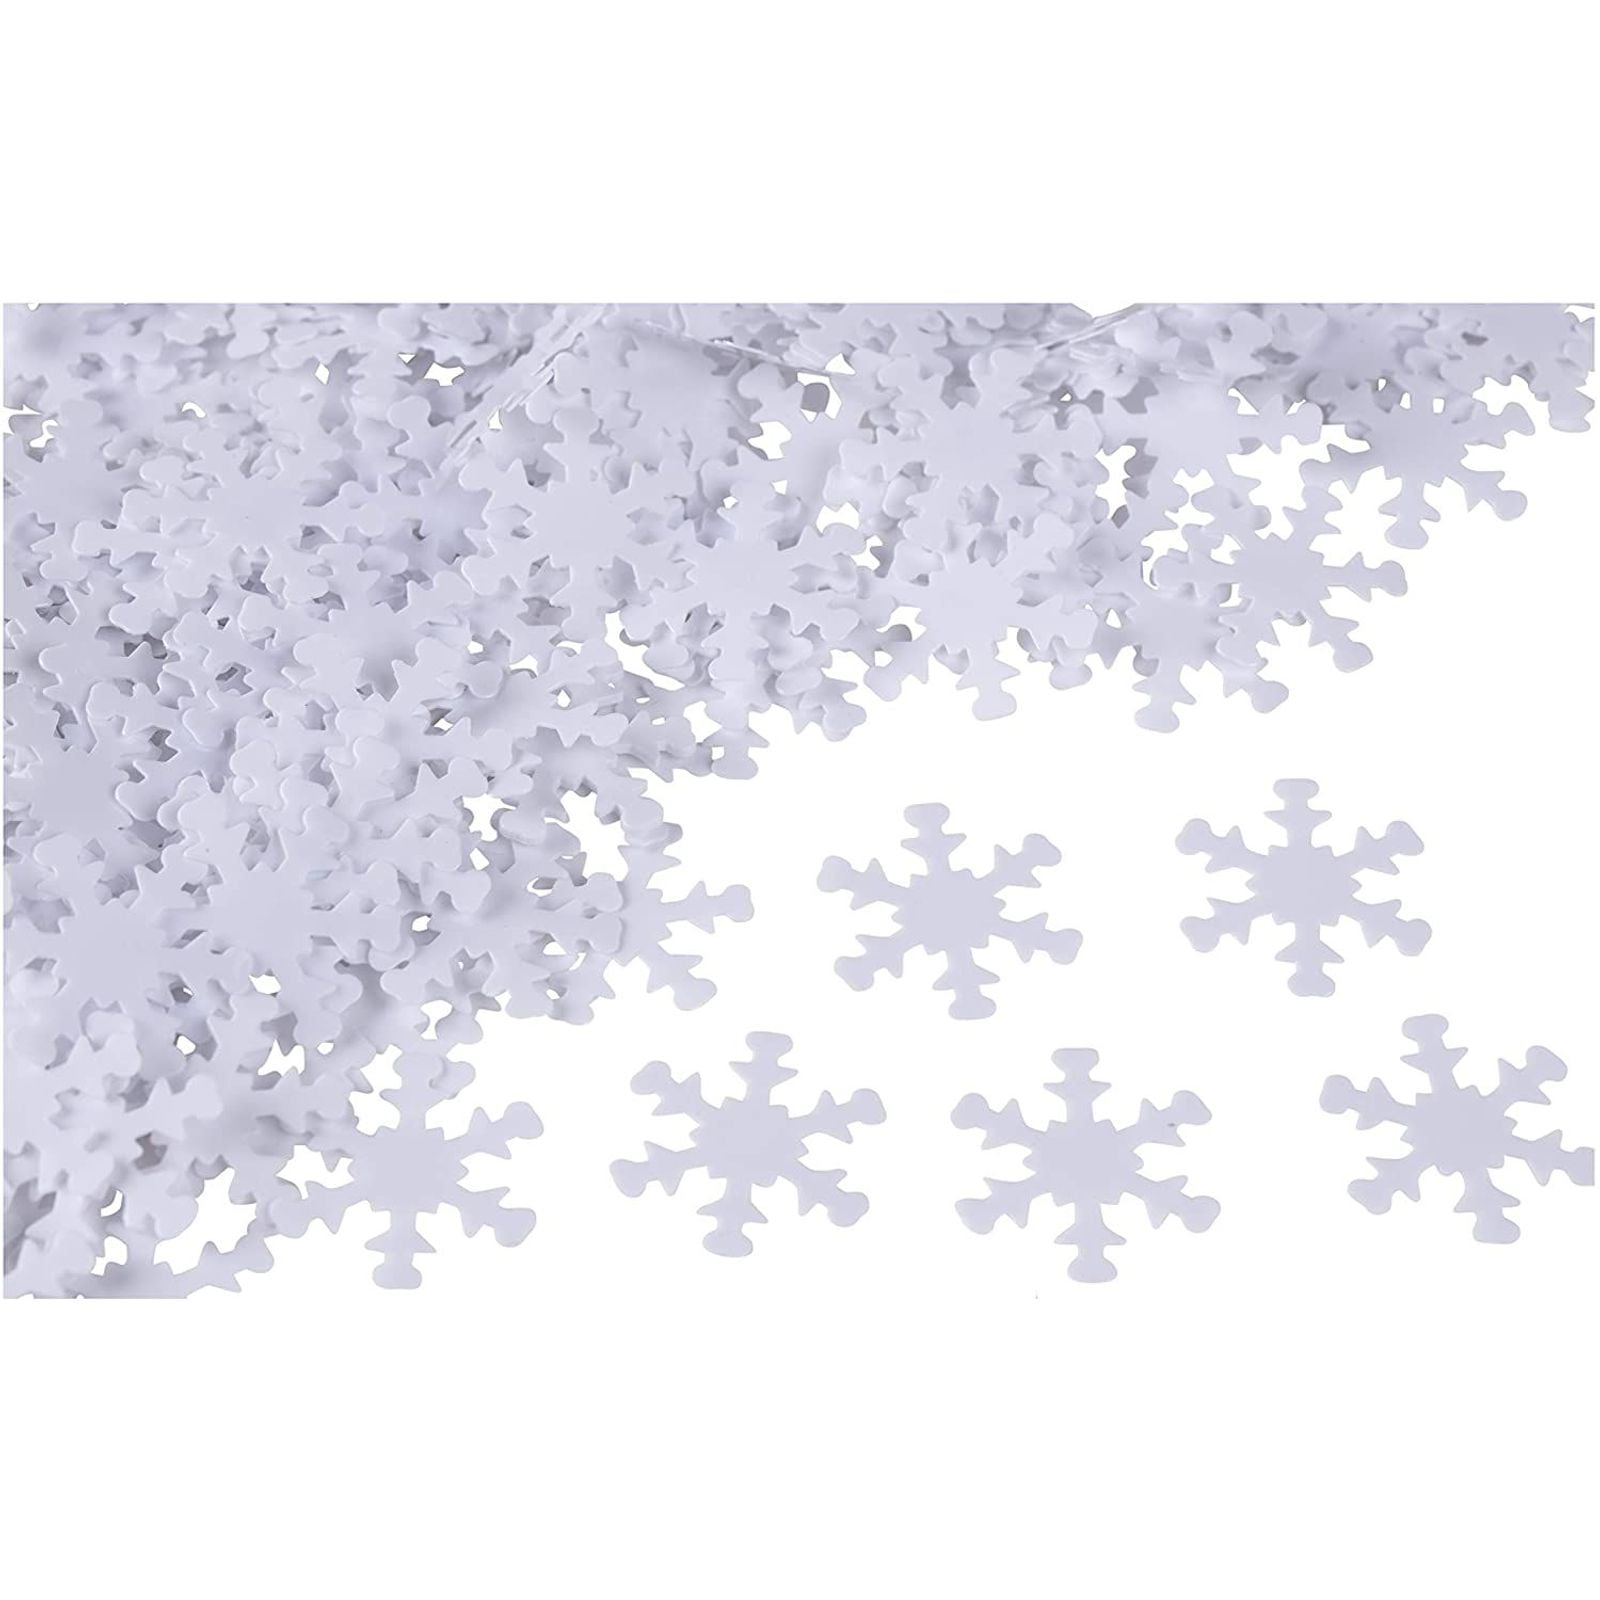 Decoration Props Snow Shape Crafts Sprinkles Christmas Tabletop Confetti 